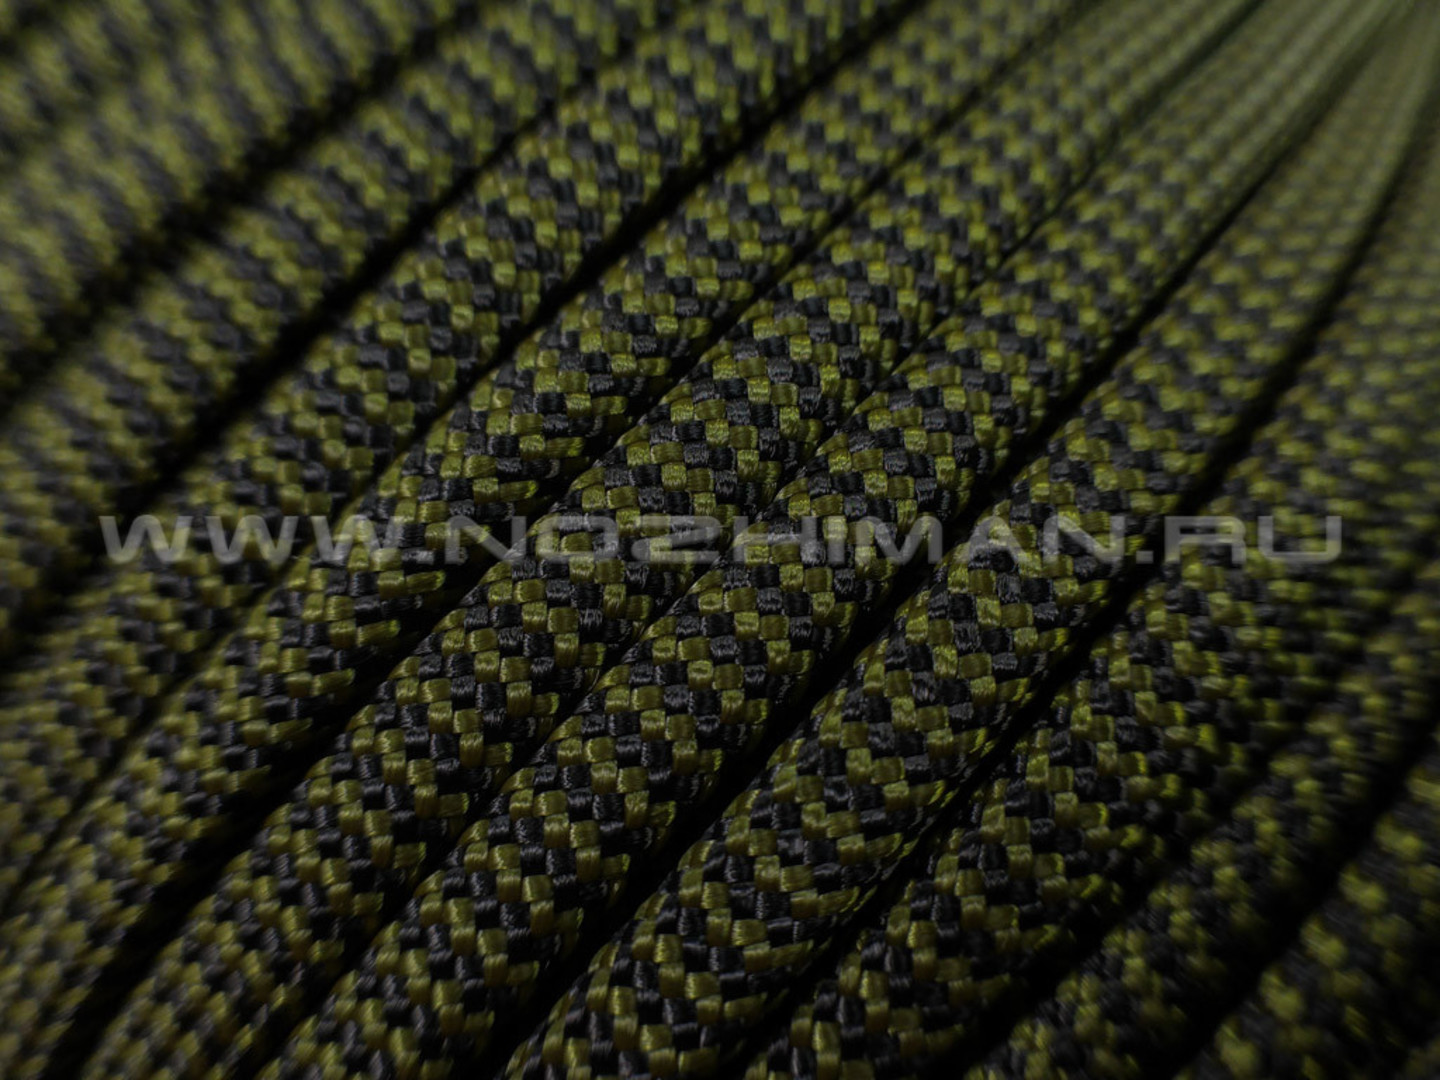 Paracord 550 Army Green Wave